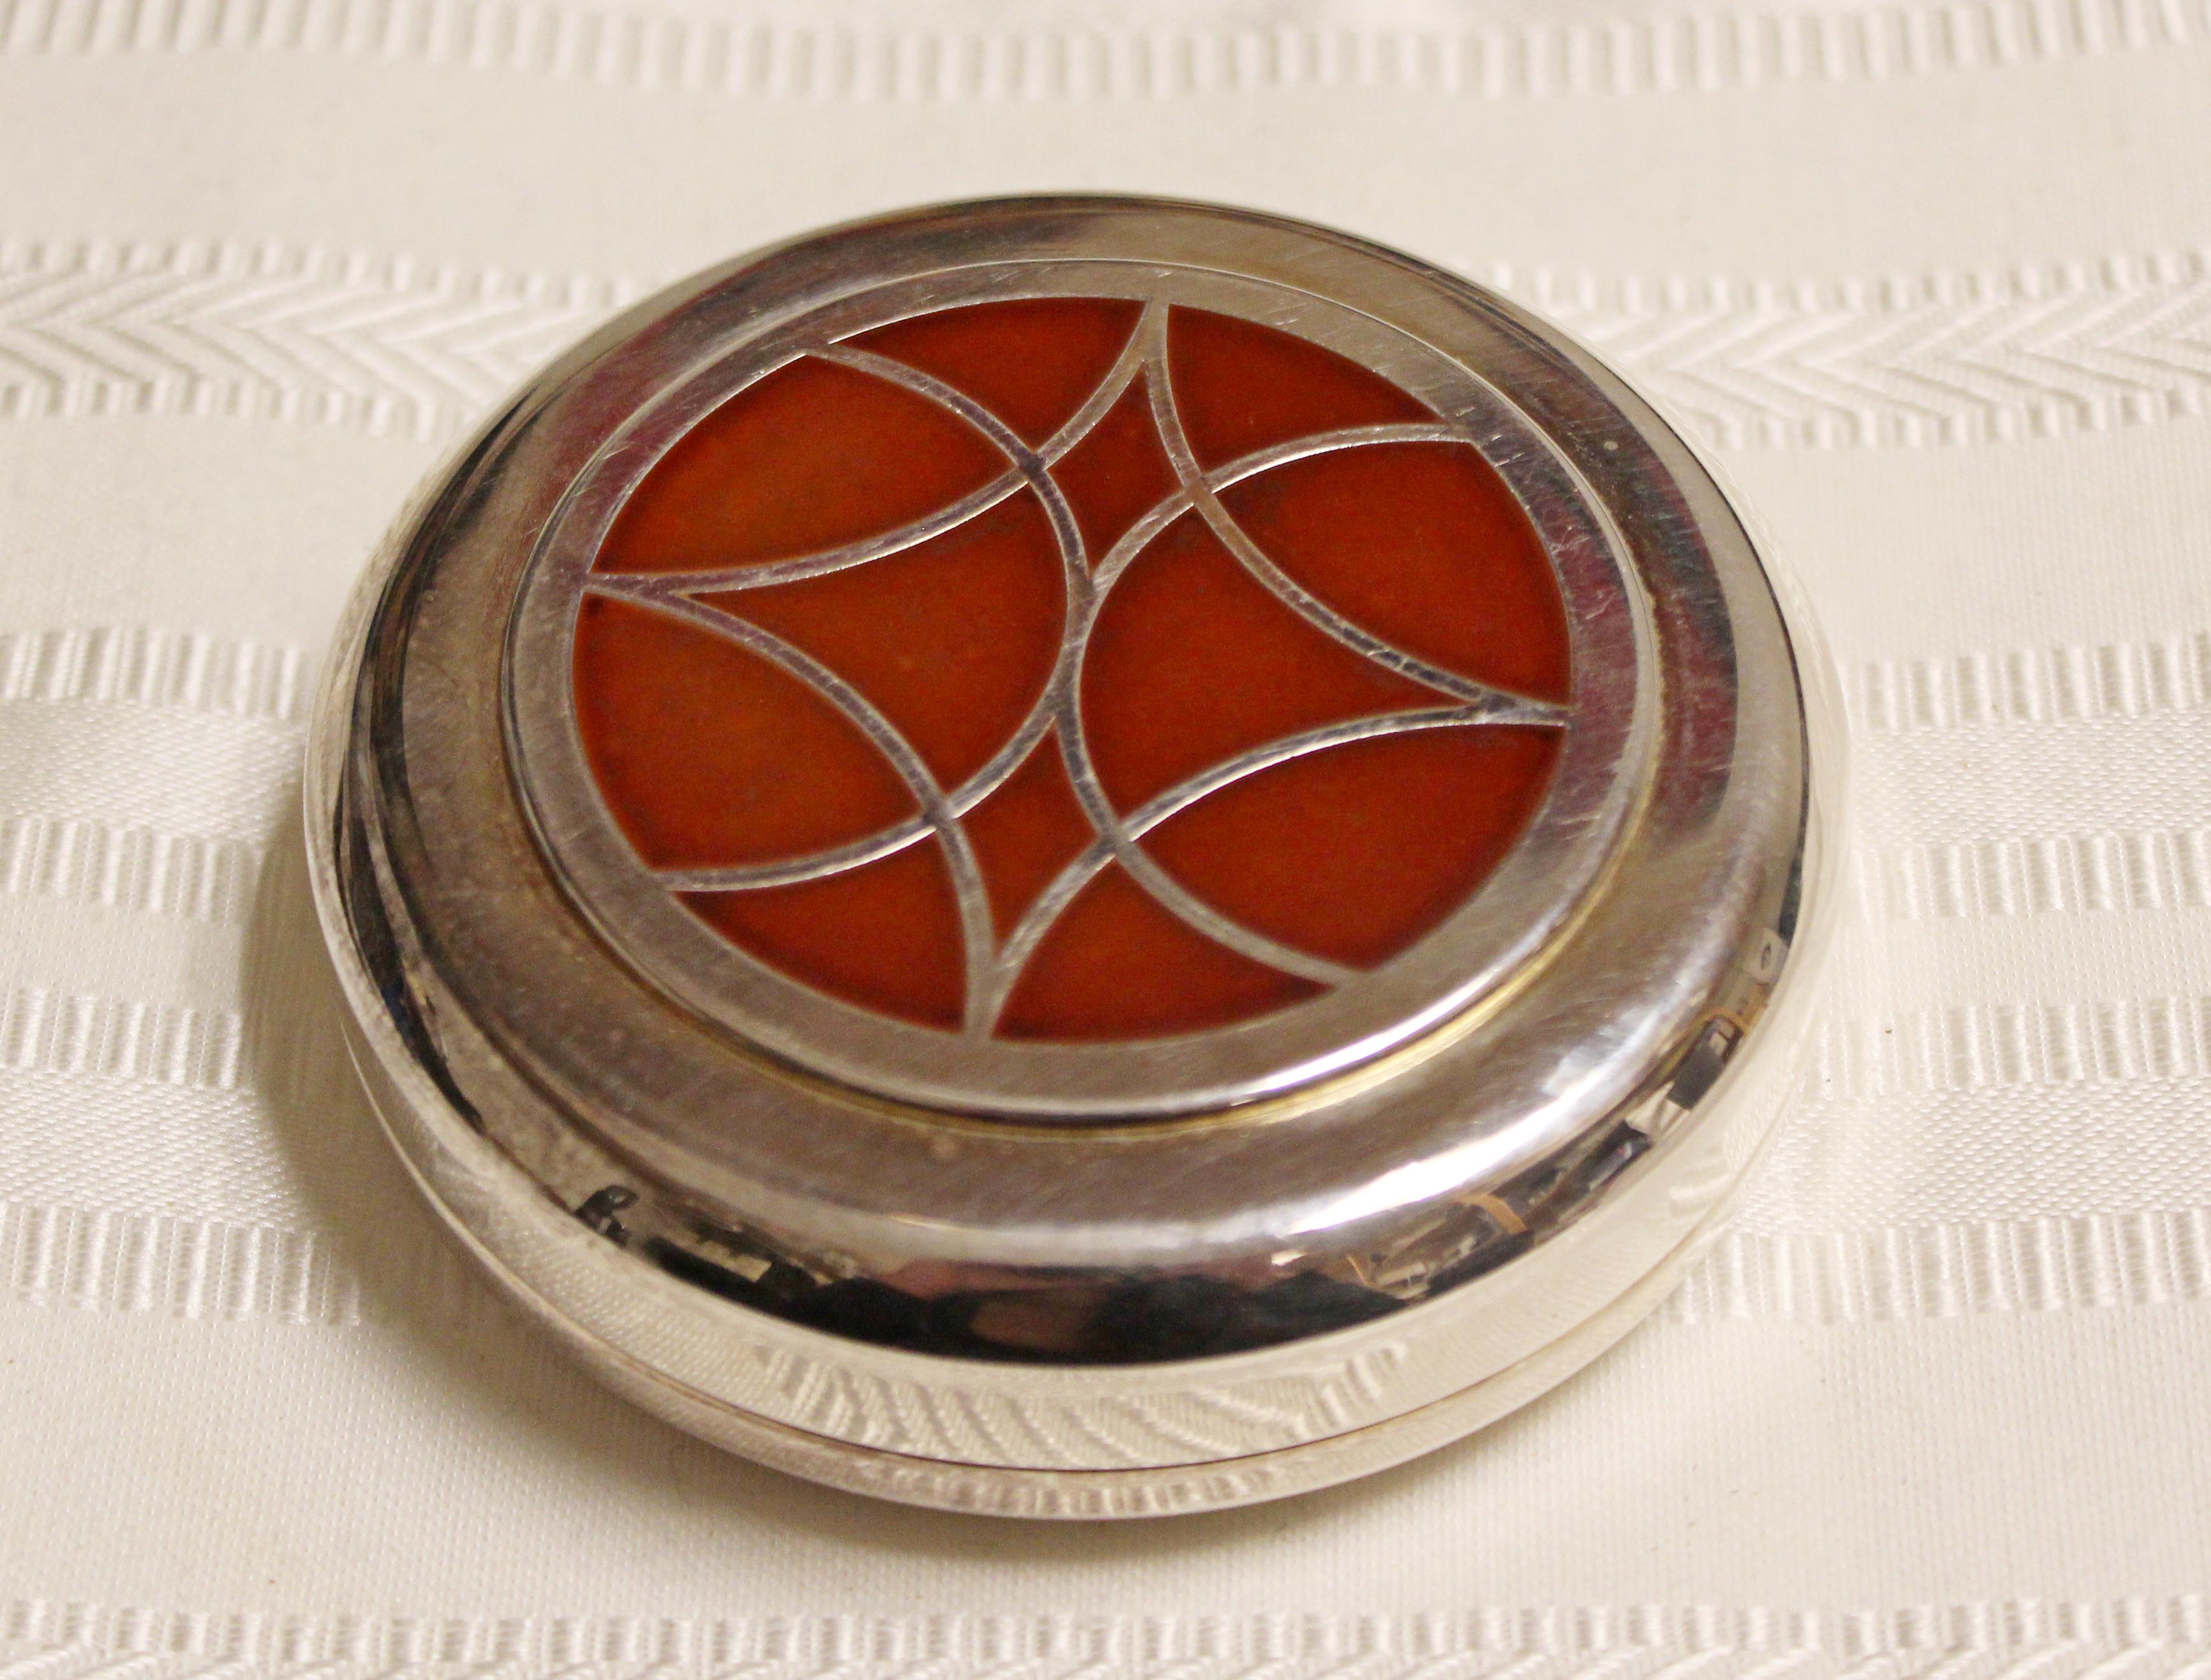 For your consideration is a magnificent, sterling silver, inlaid box container, by Christofle, made in France, circa 1910s. In excellent condition. The dimensions are 2.5